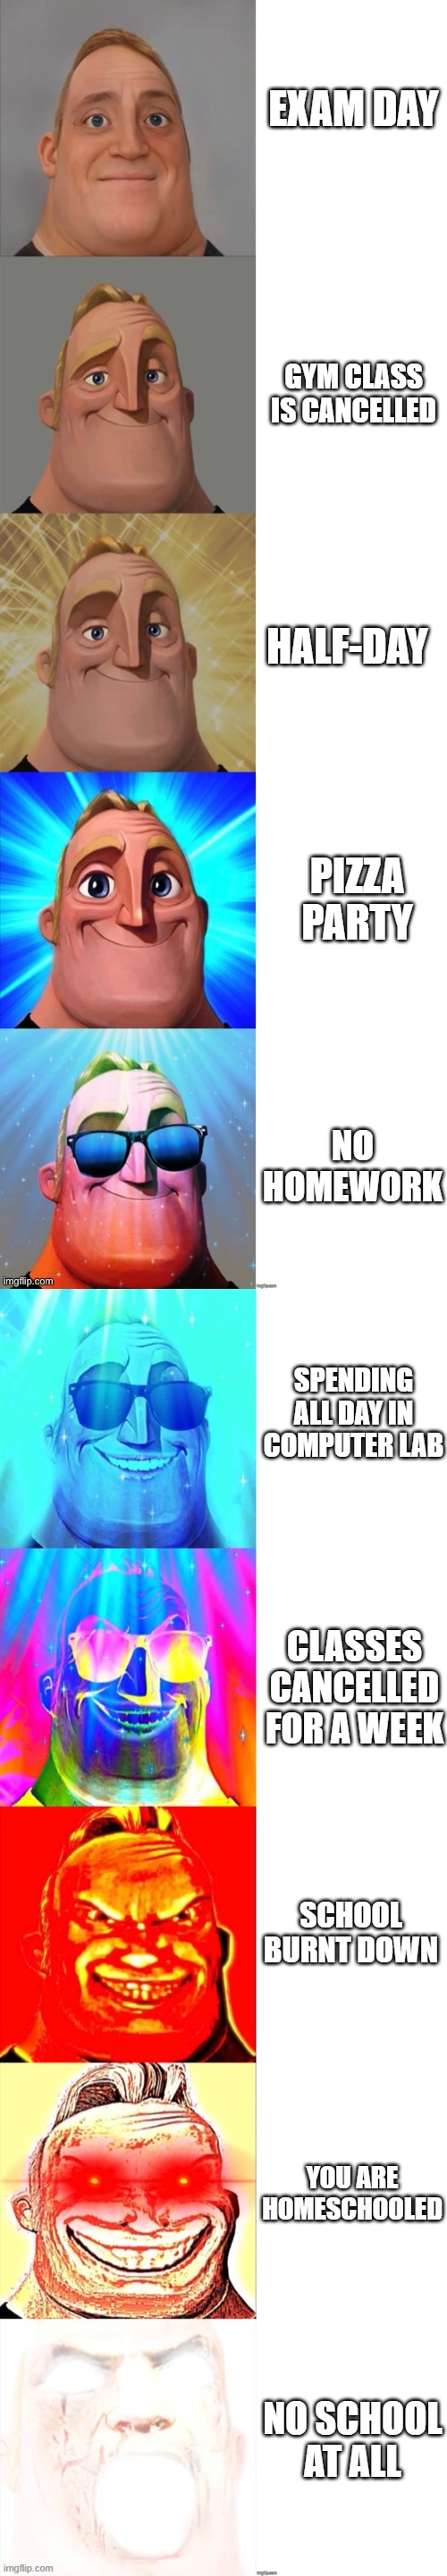 Mr Incredible Becoming Canny | EXAM DAY; GYM CLASS IS CANCELLED; HALF-DAY; PIZZA PARTY; NO HOMEWORK; SPENDING ALL DAY IN COMPUTER LAB; CLASSES CANCELLED FOR A WEEK; SCHOOL BURNT DOWN; YOU ARE HOMESCHOOLED; NO SCHOOL AT ALL | image tagged in mr incredible becoming canny | made w/ Imgflip meme maker